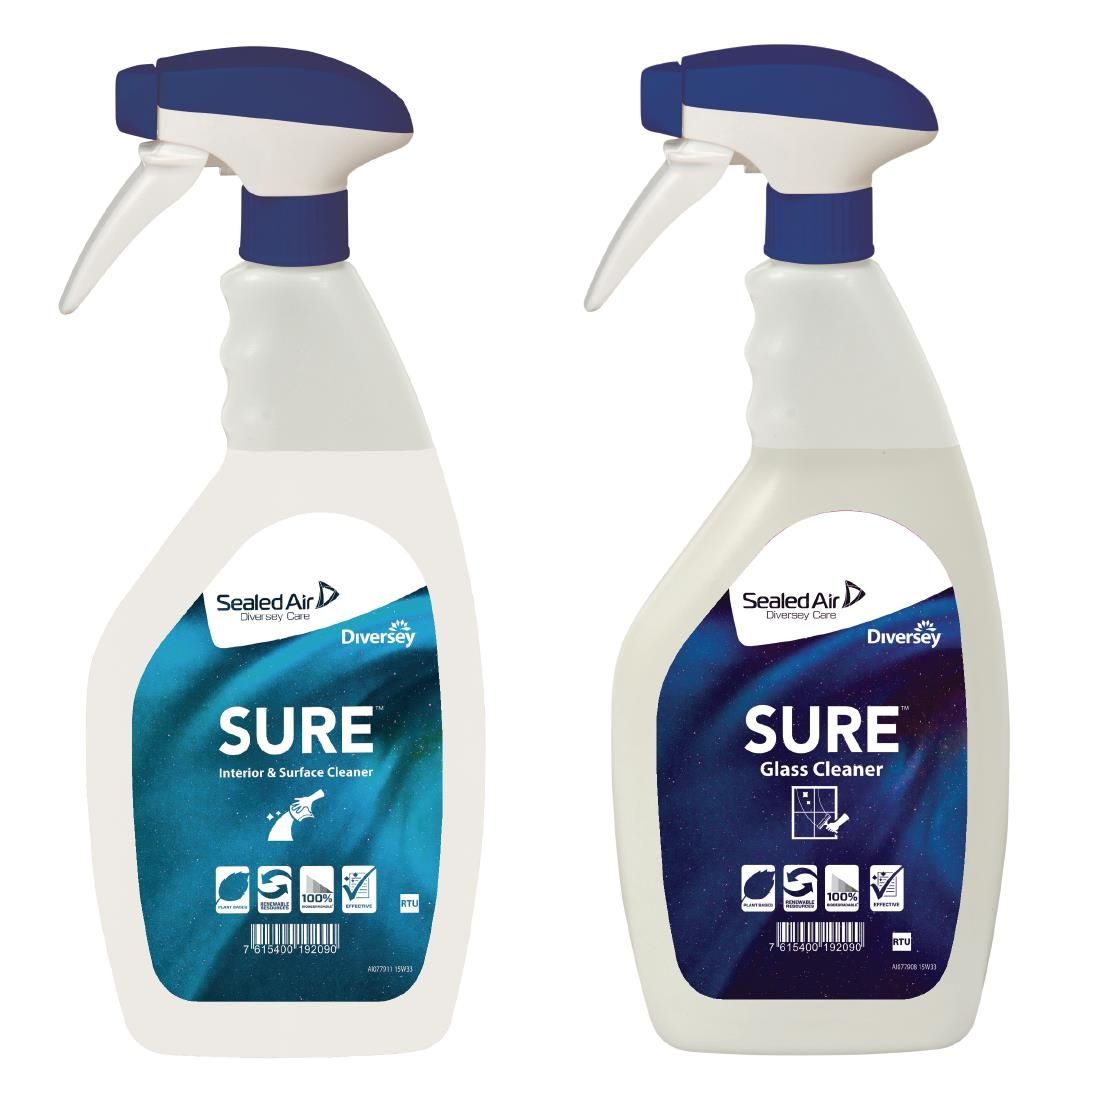 SURE Glass Cleaner / Interior and Surface Cleaner Refill Bottles 750ml (6 Pack)